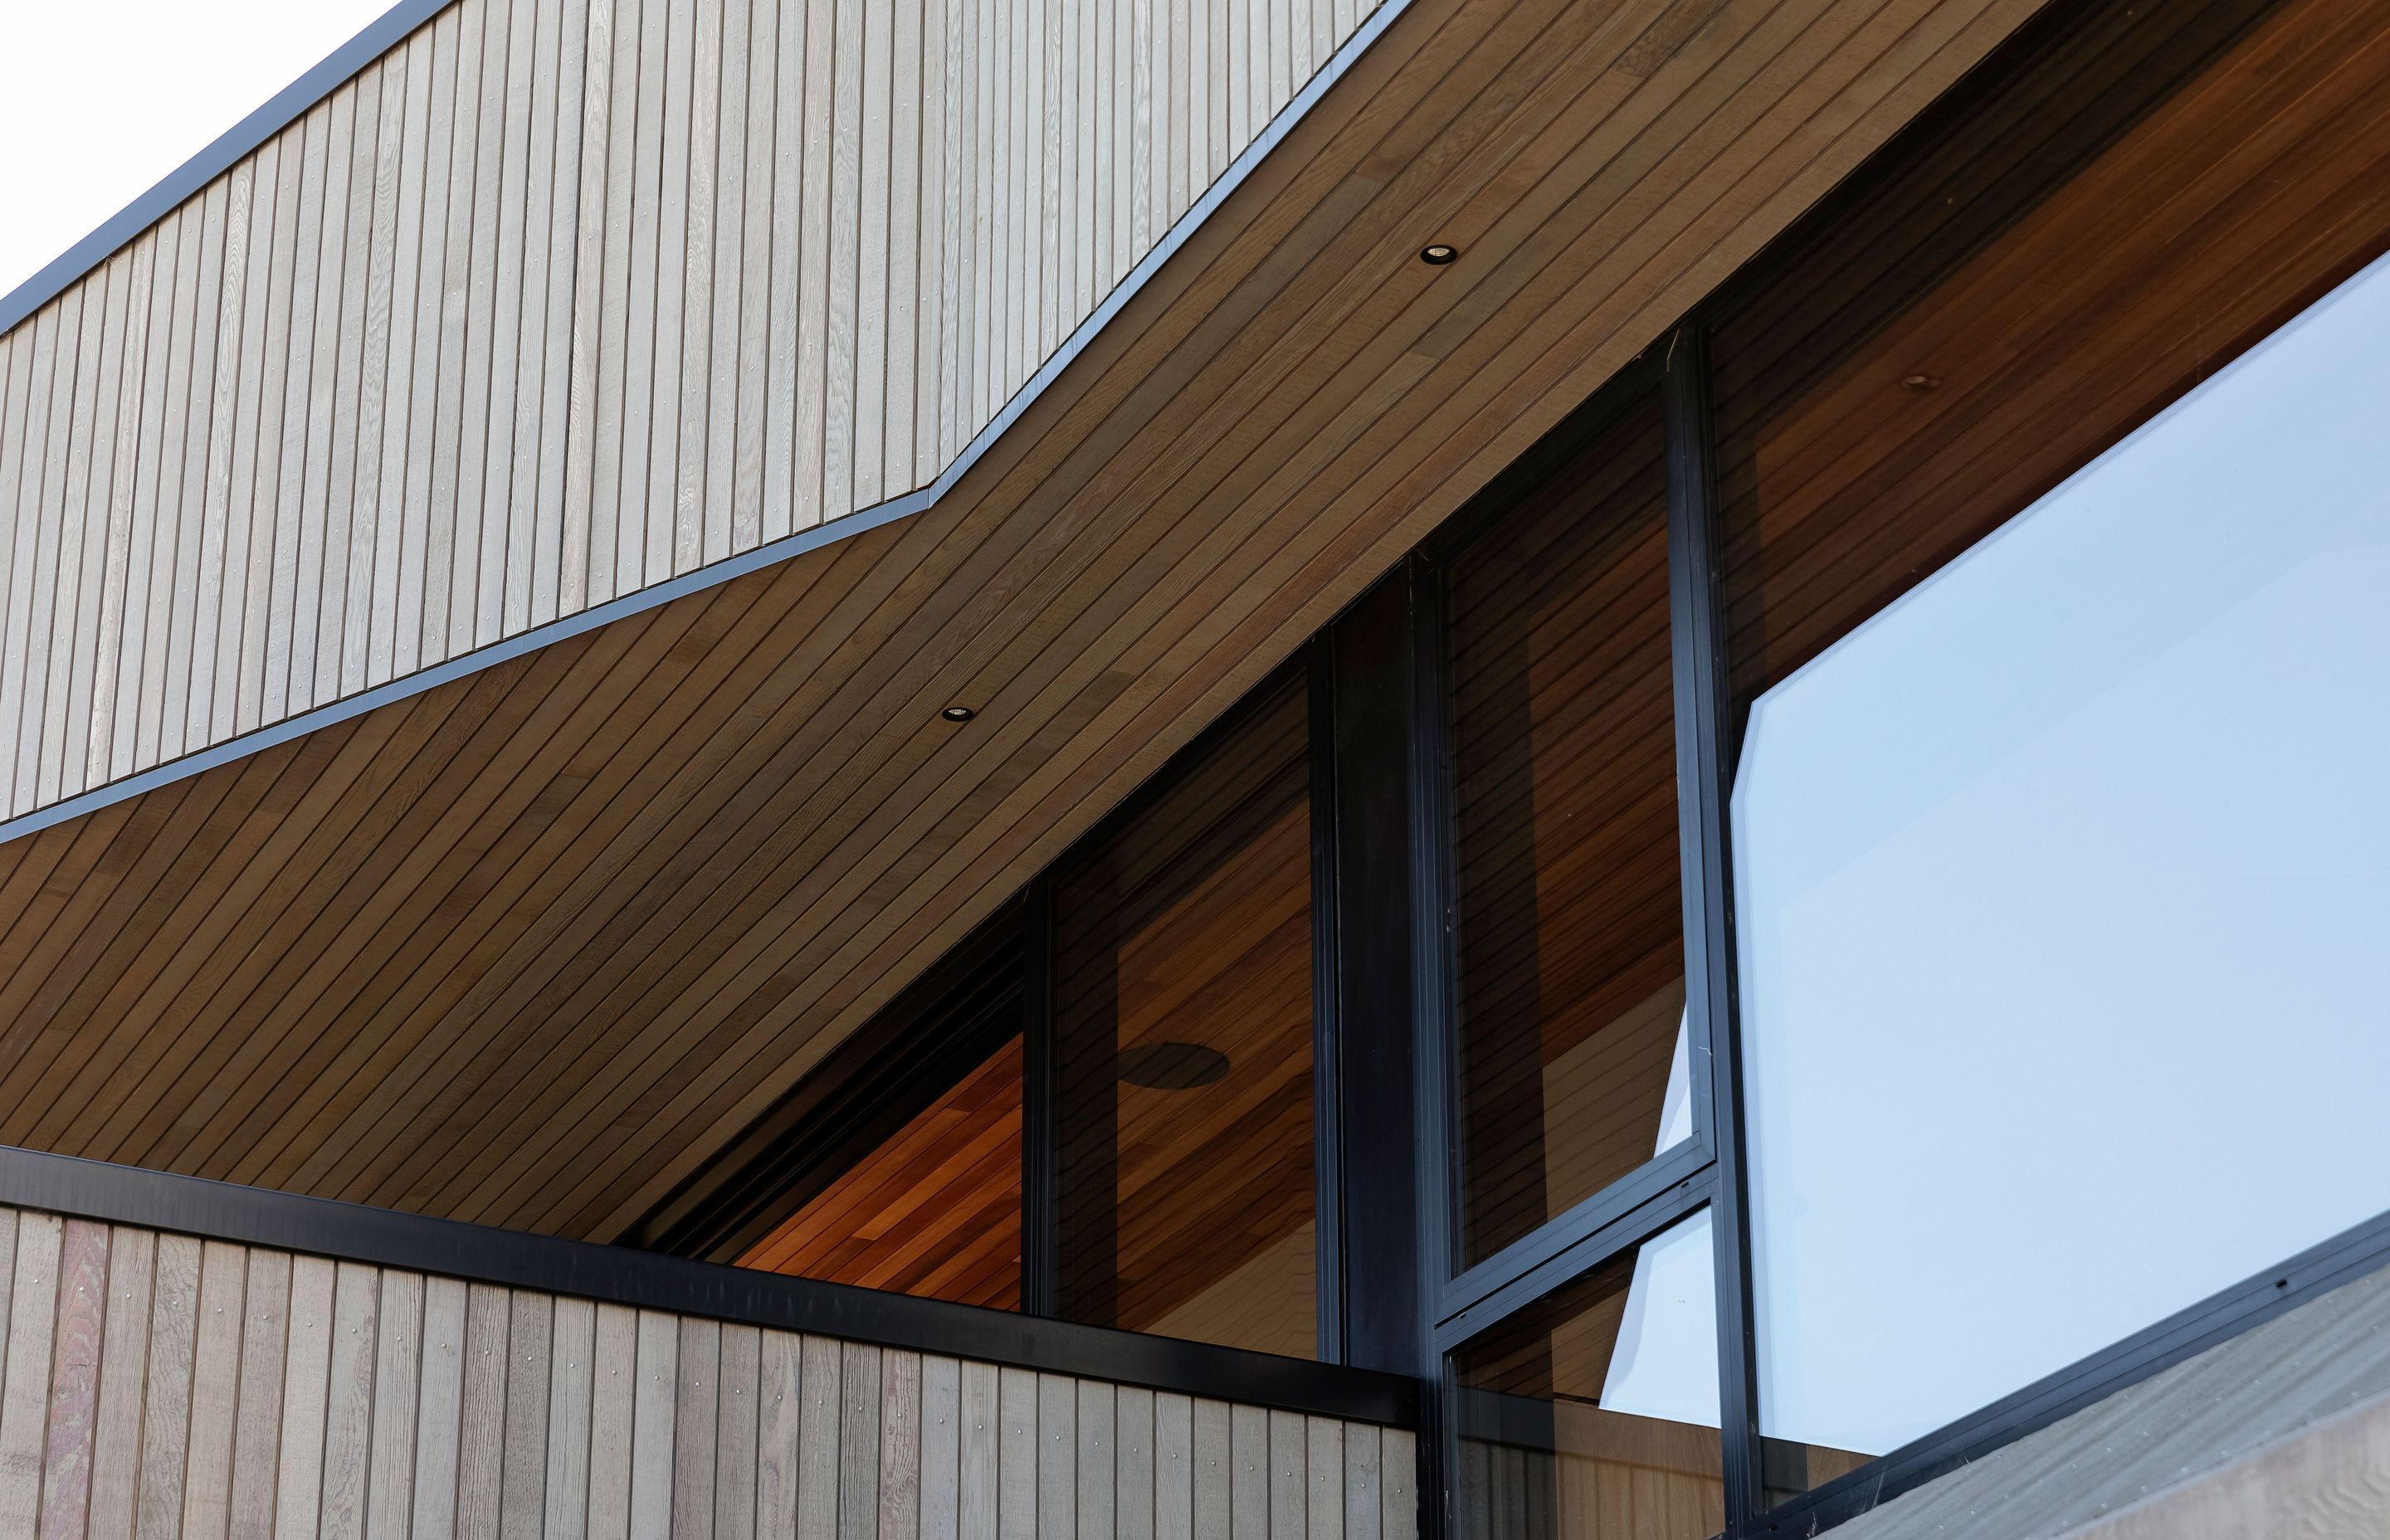 The angular cedar elevations give the home a sculptural quality.